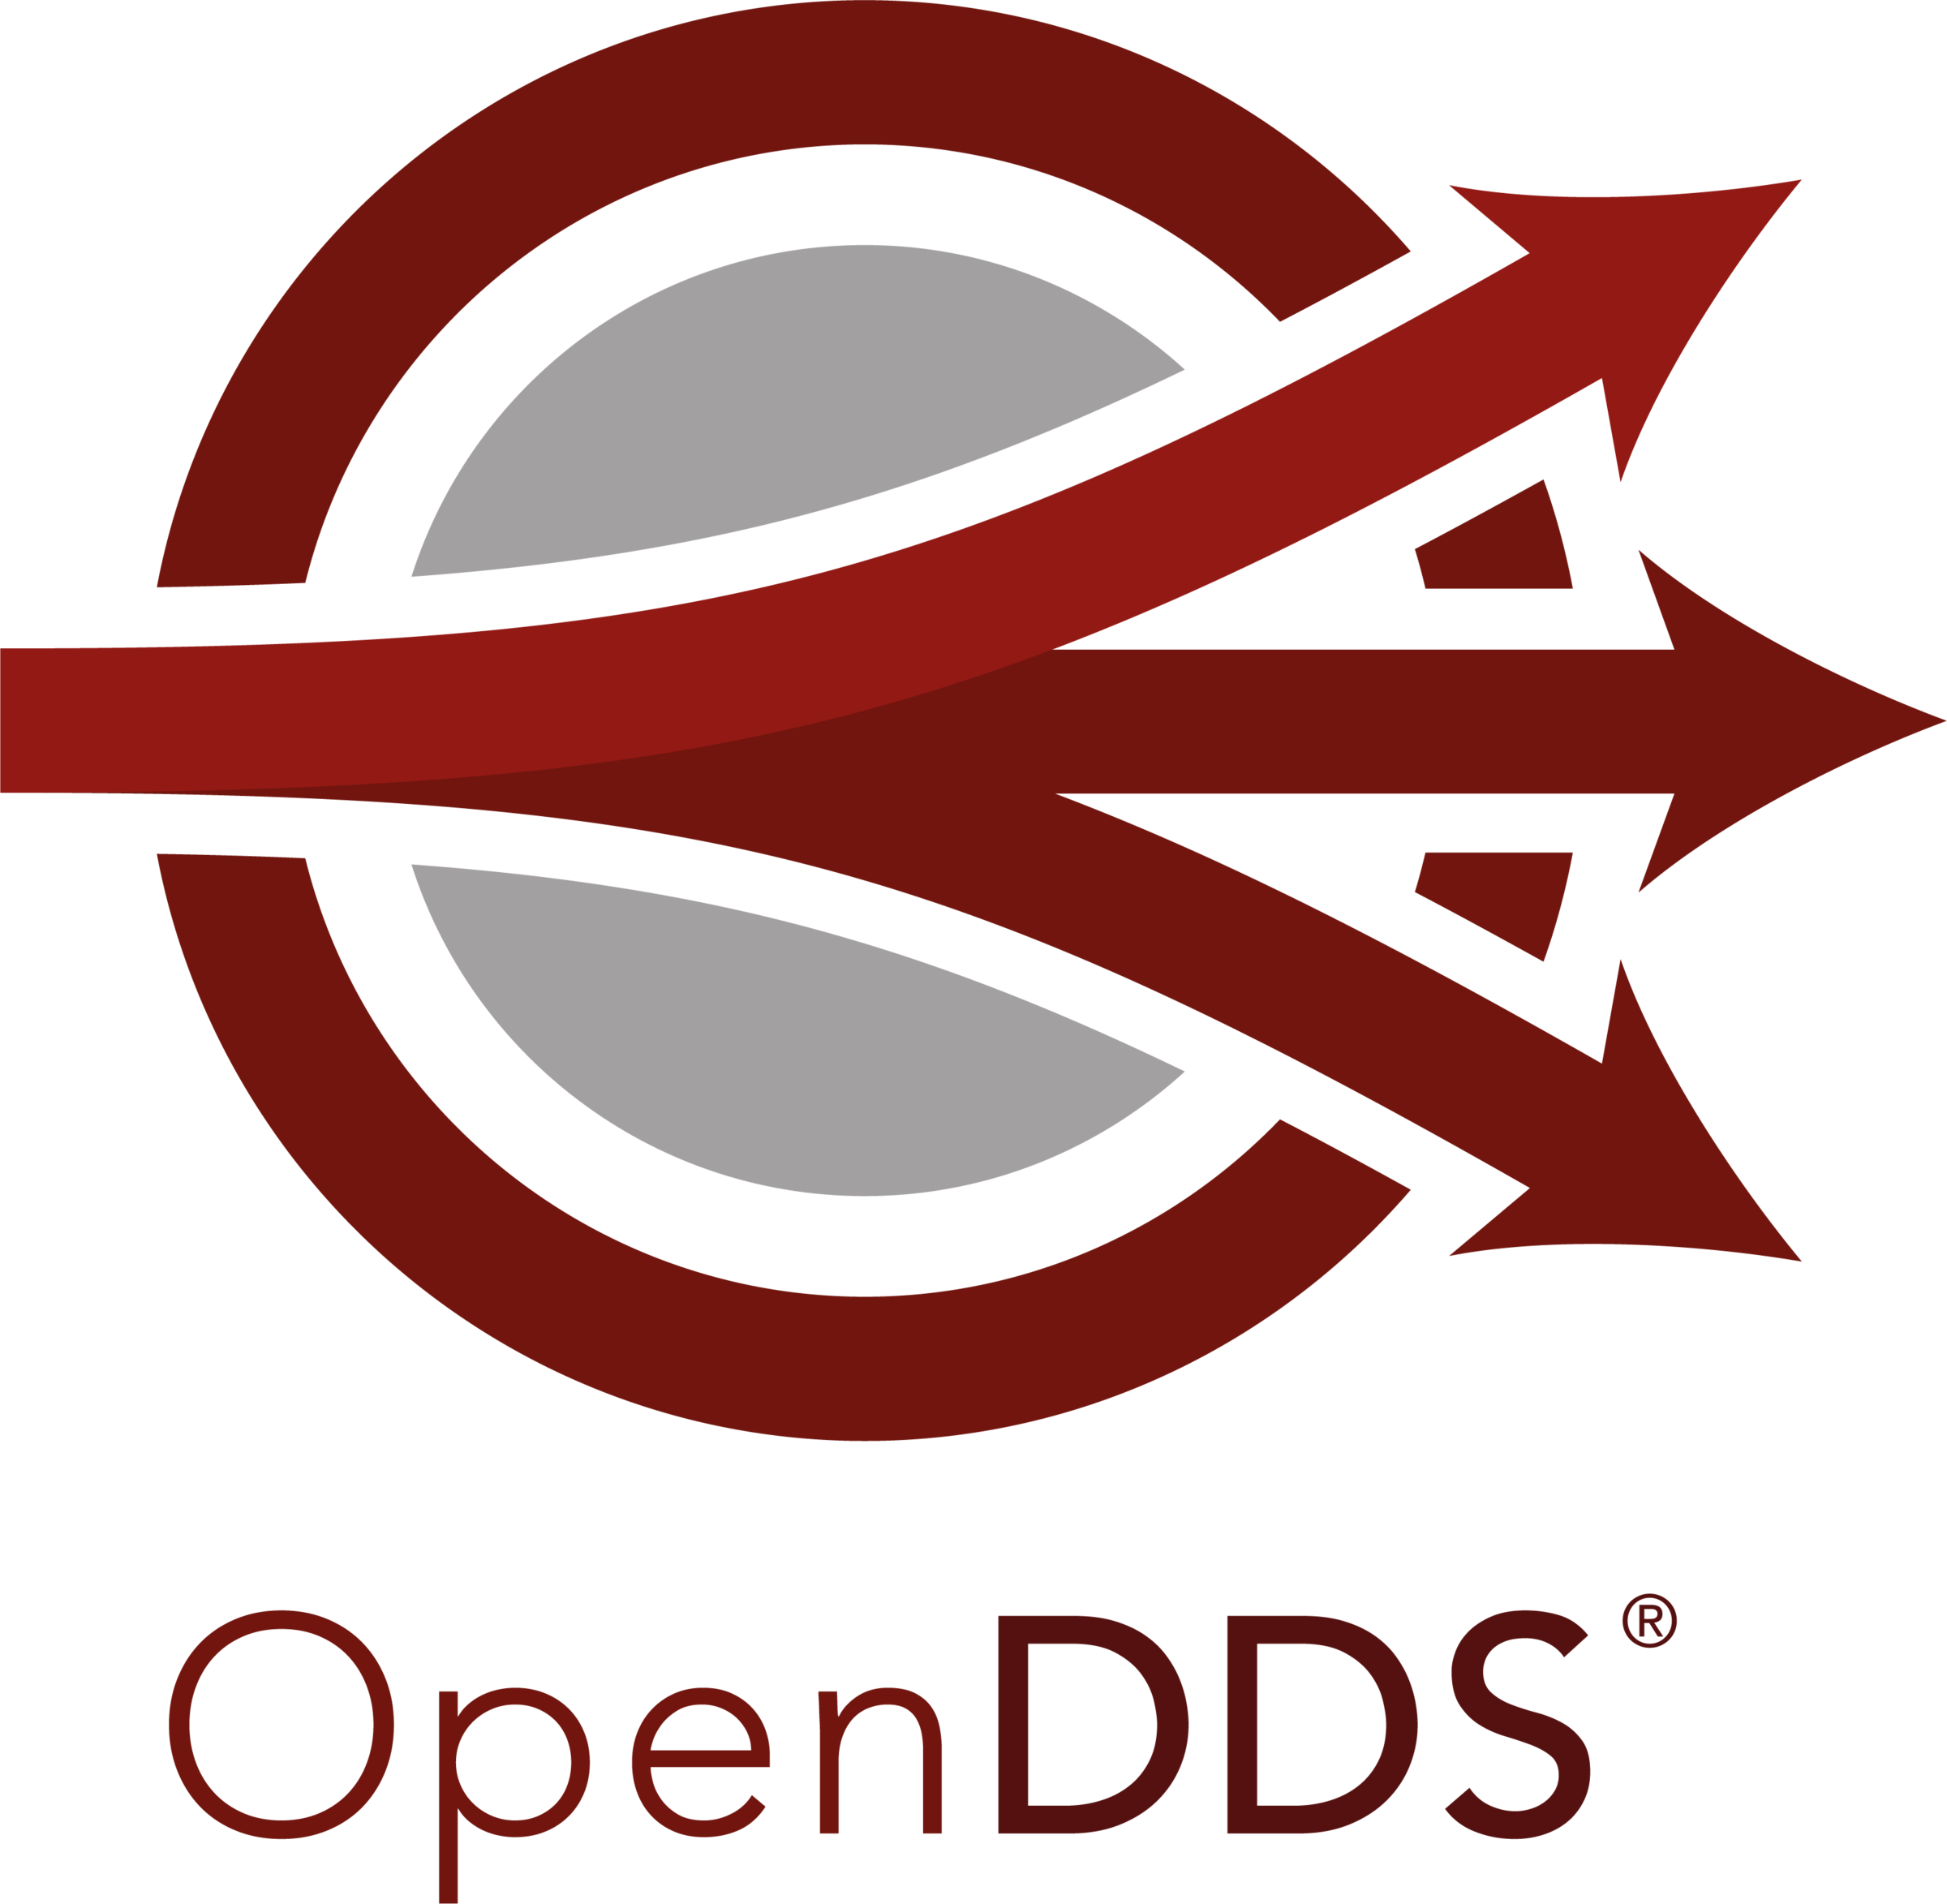 The OpenDDS Project